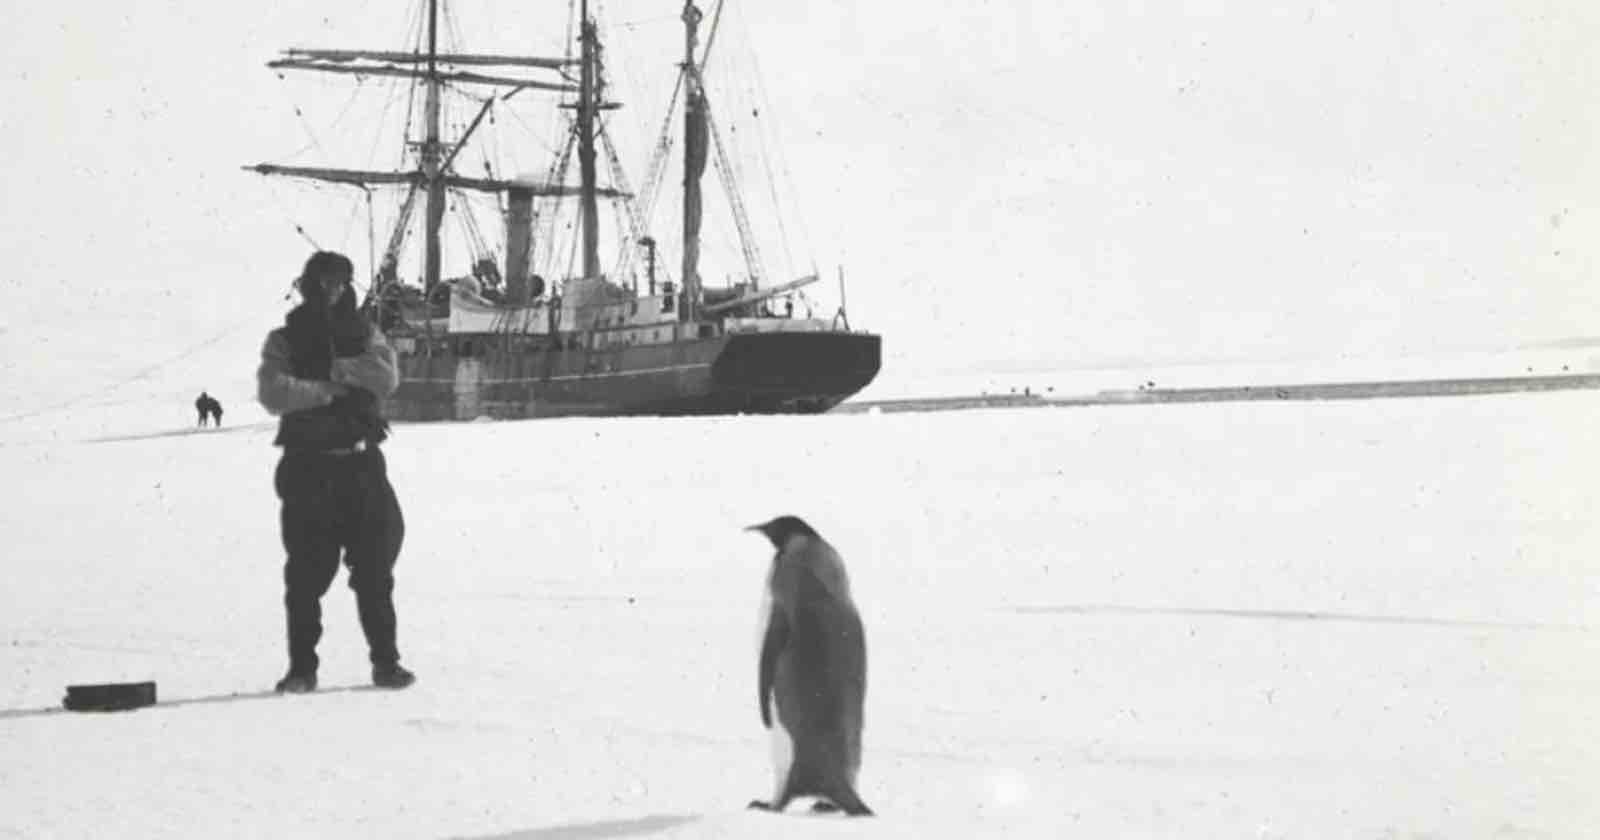 Rare Photos From Early Antarctic Expeditions Digitized for First Time